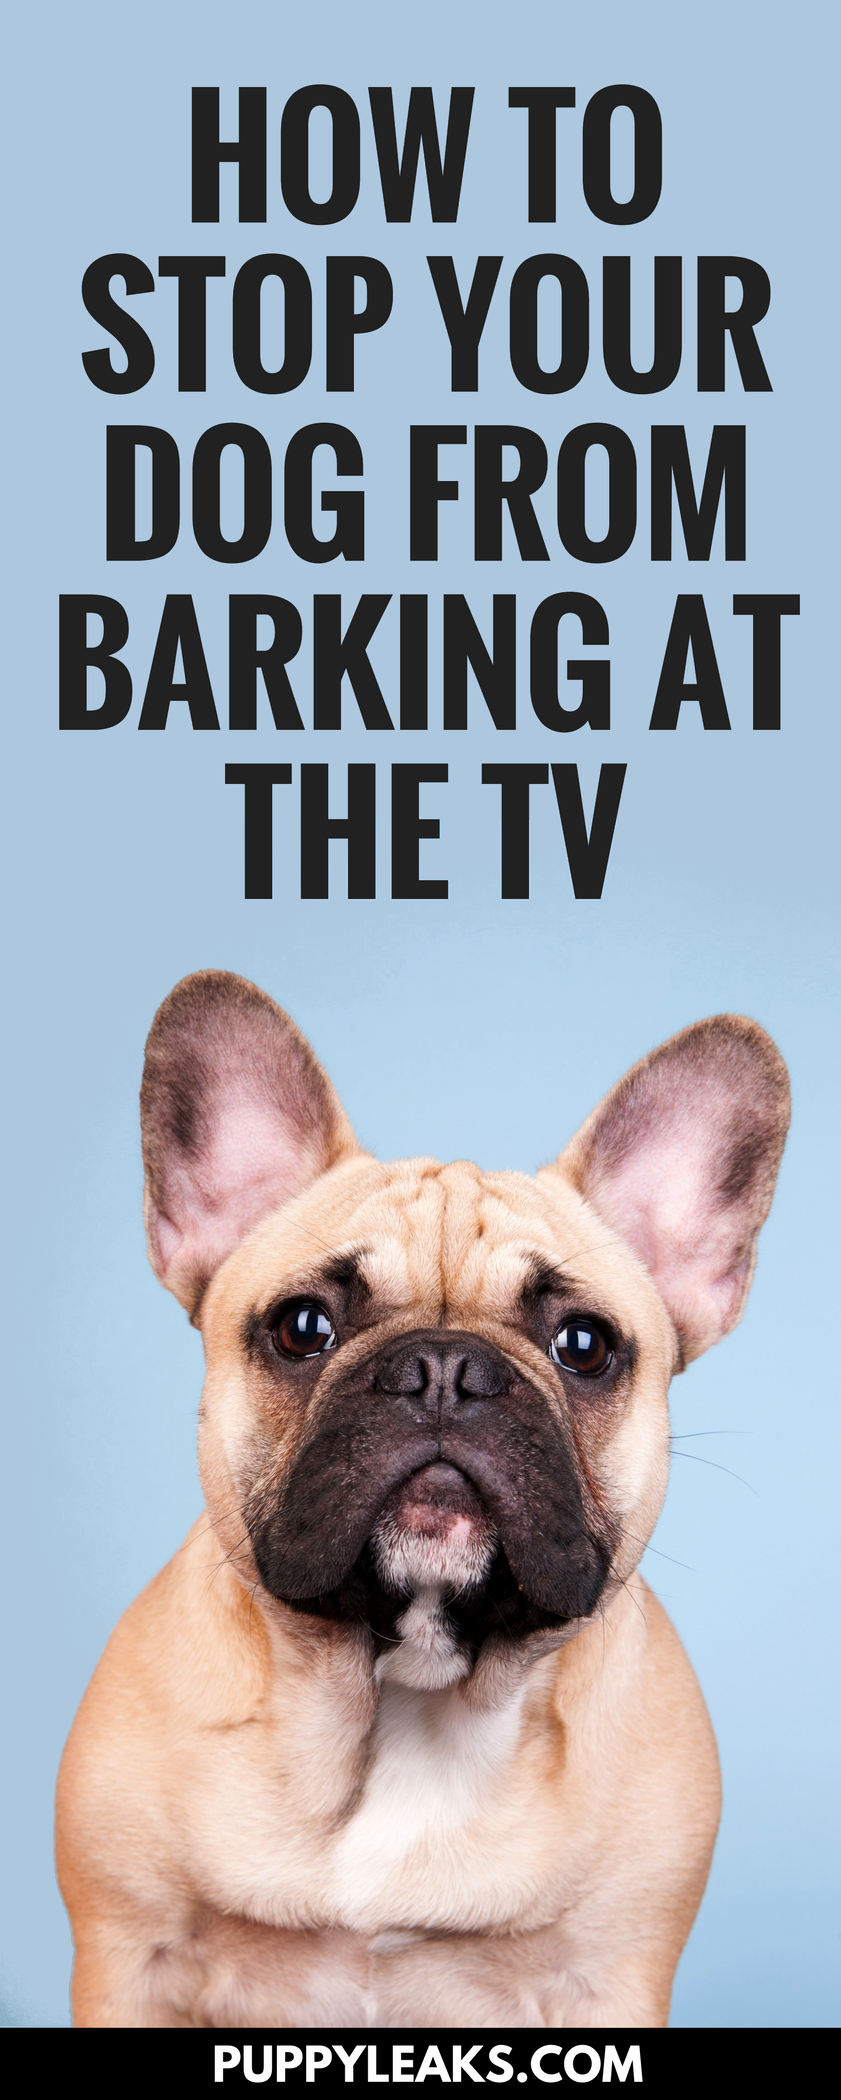 How to Stop Your Dog From Barking at the TV